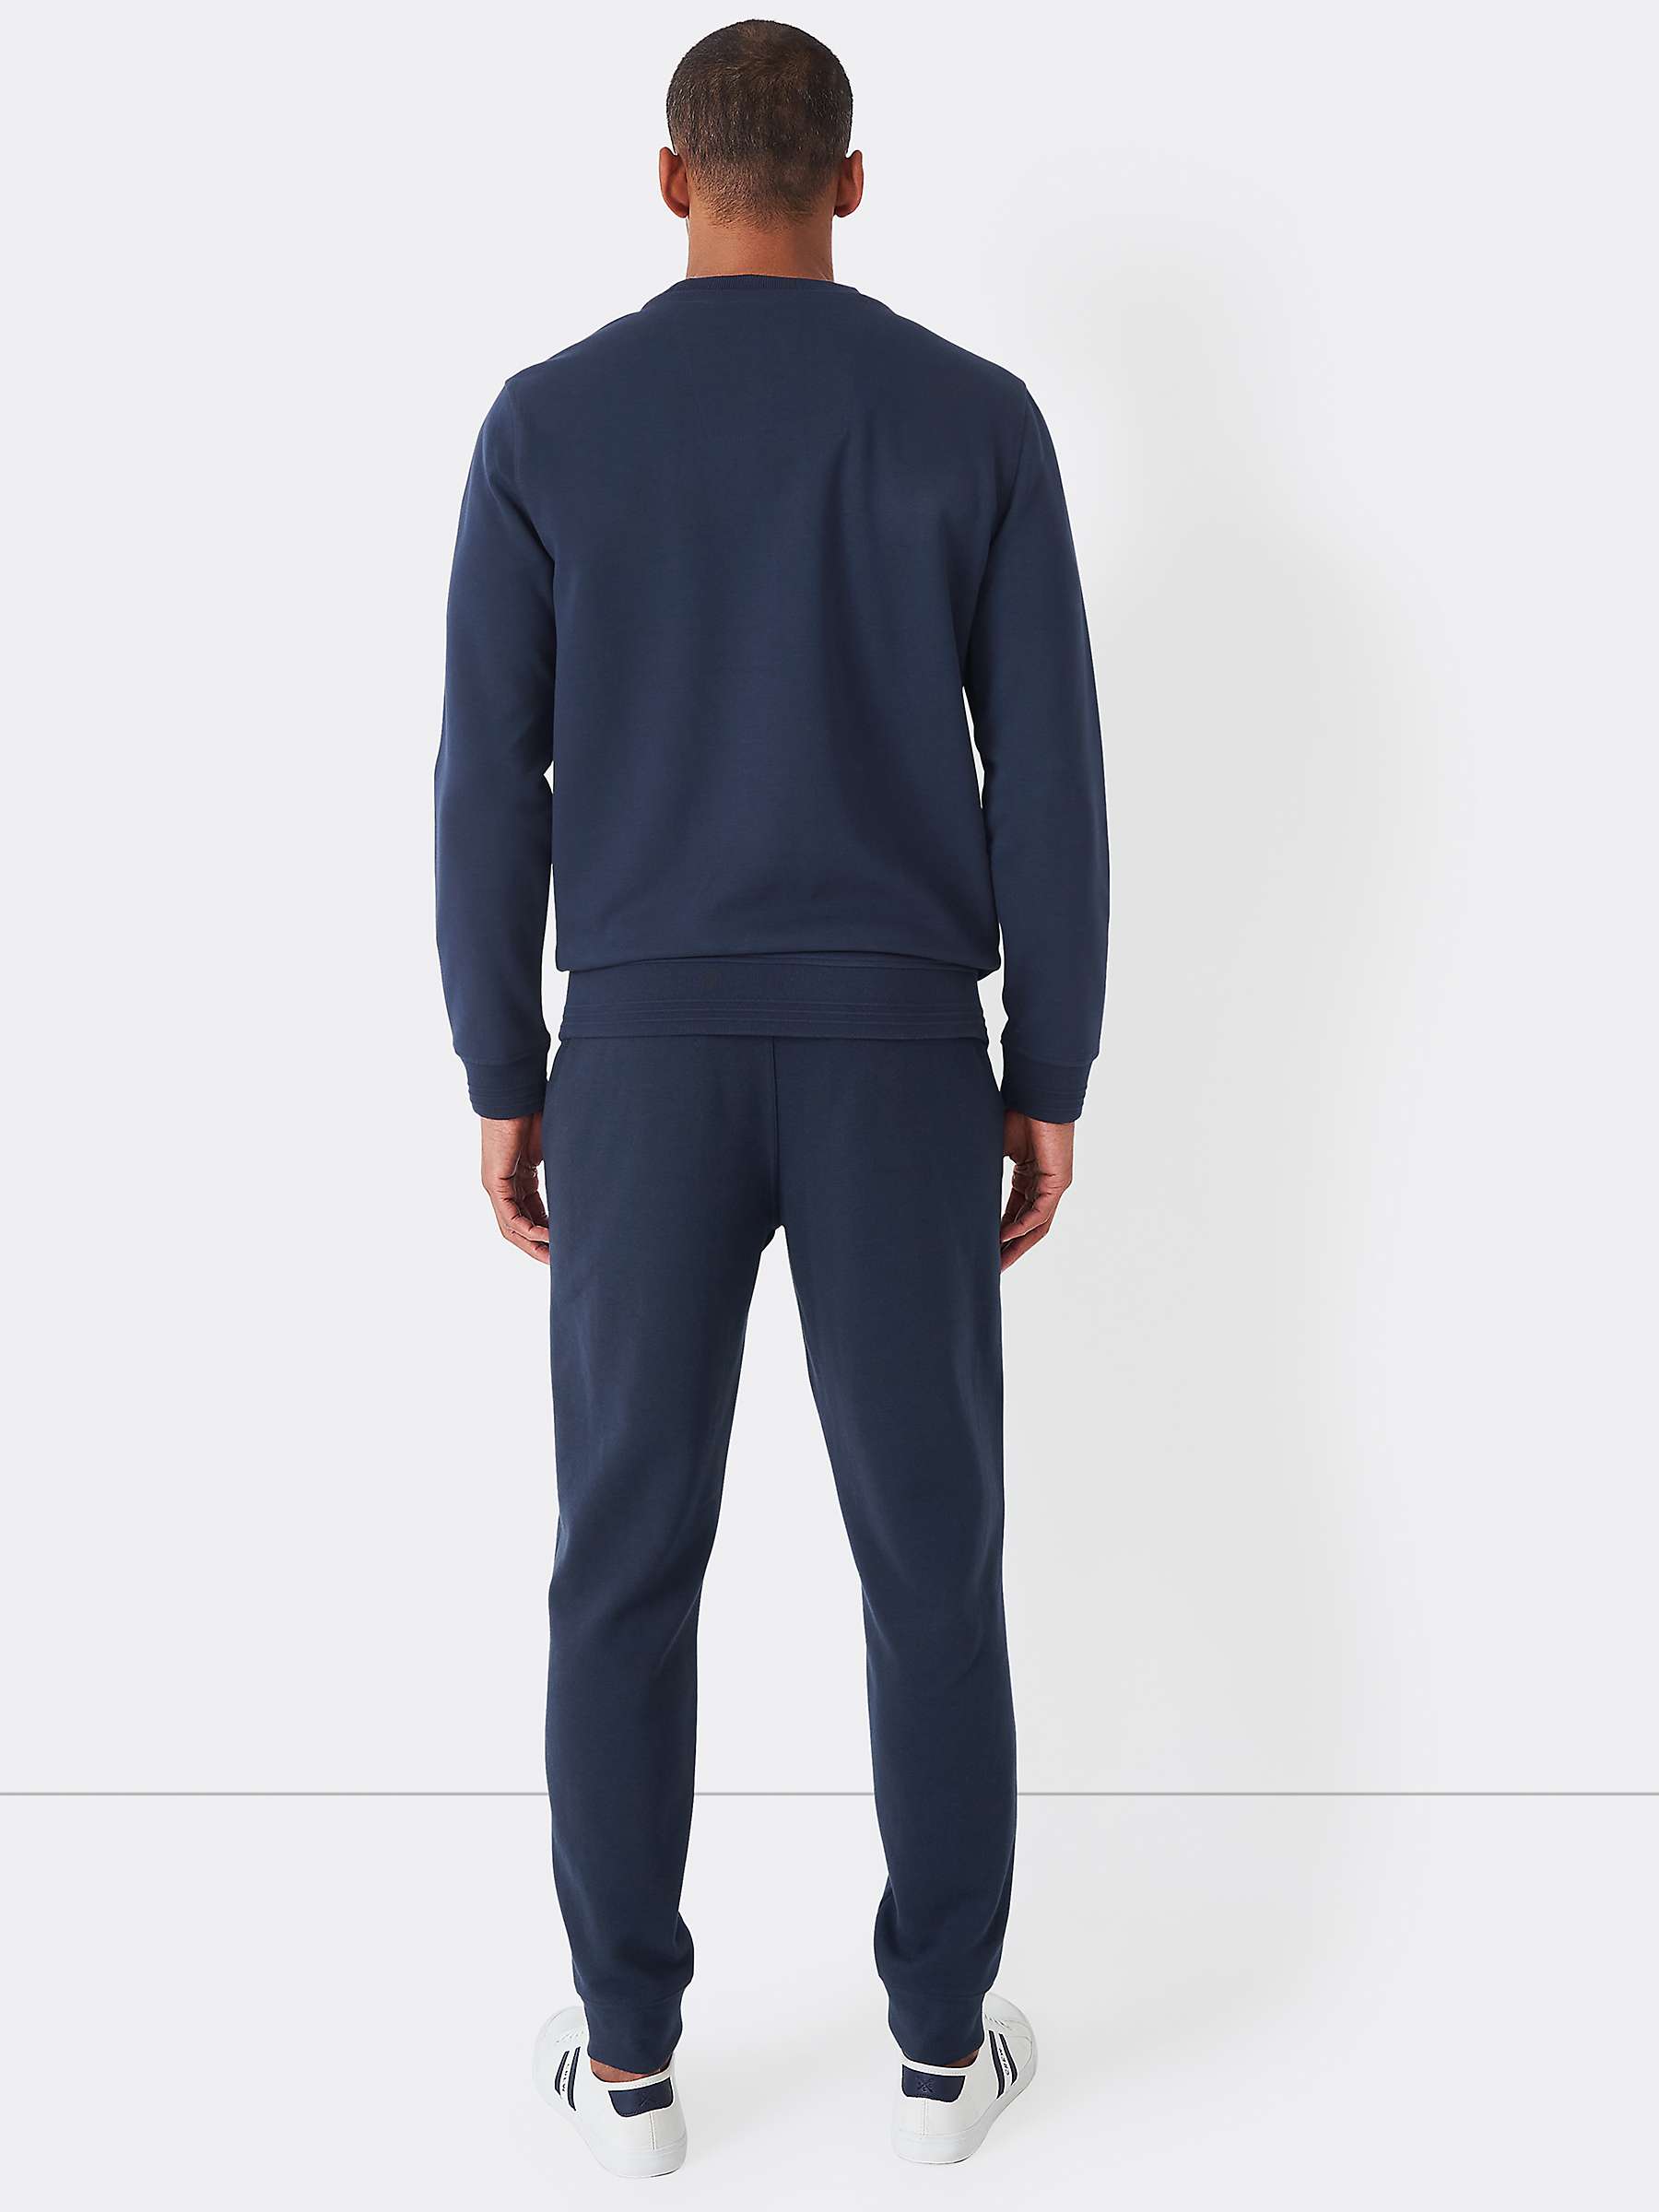 Buy Crew Clothing Fairford Joggers, Navy Online at johnlewis.com